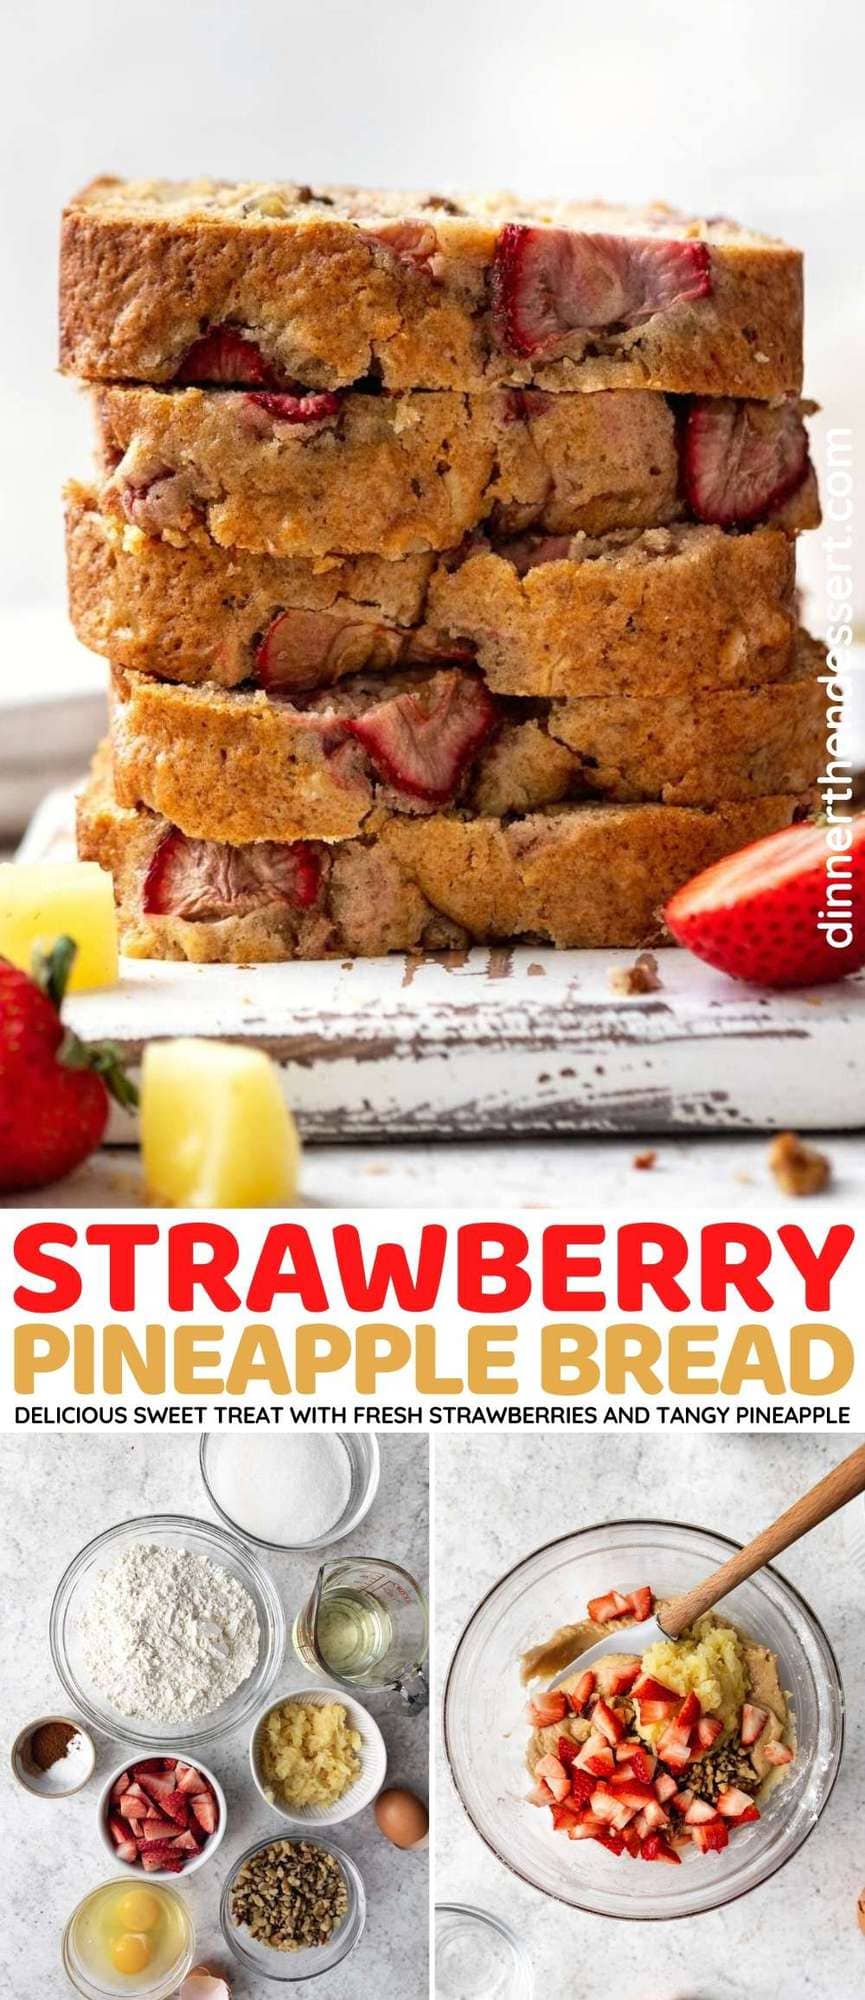 Strawberry Pineapple Bread collage